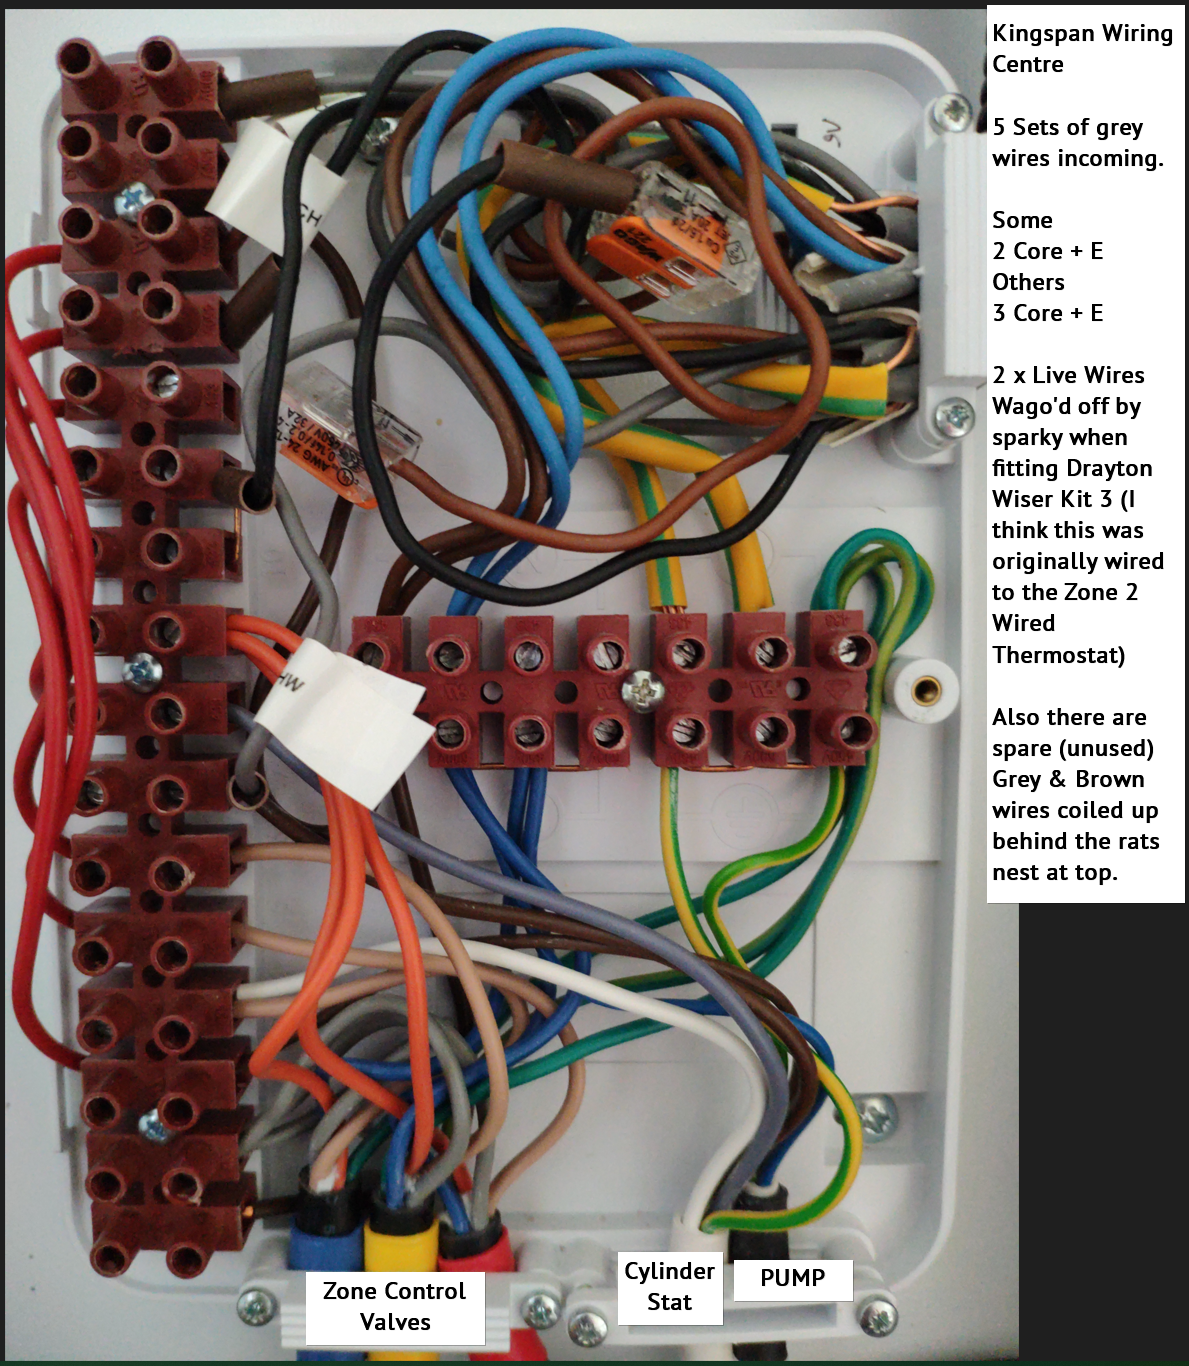 Boiler Wiring Centre Layout.png